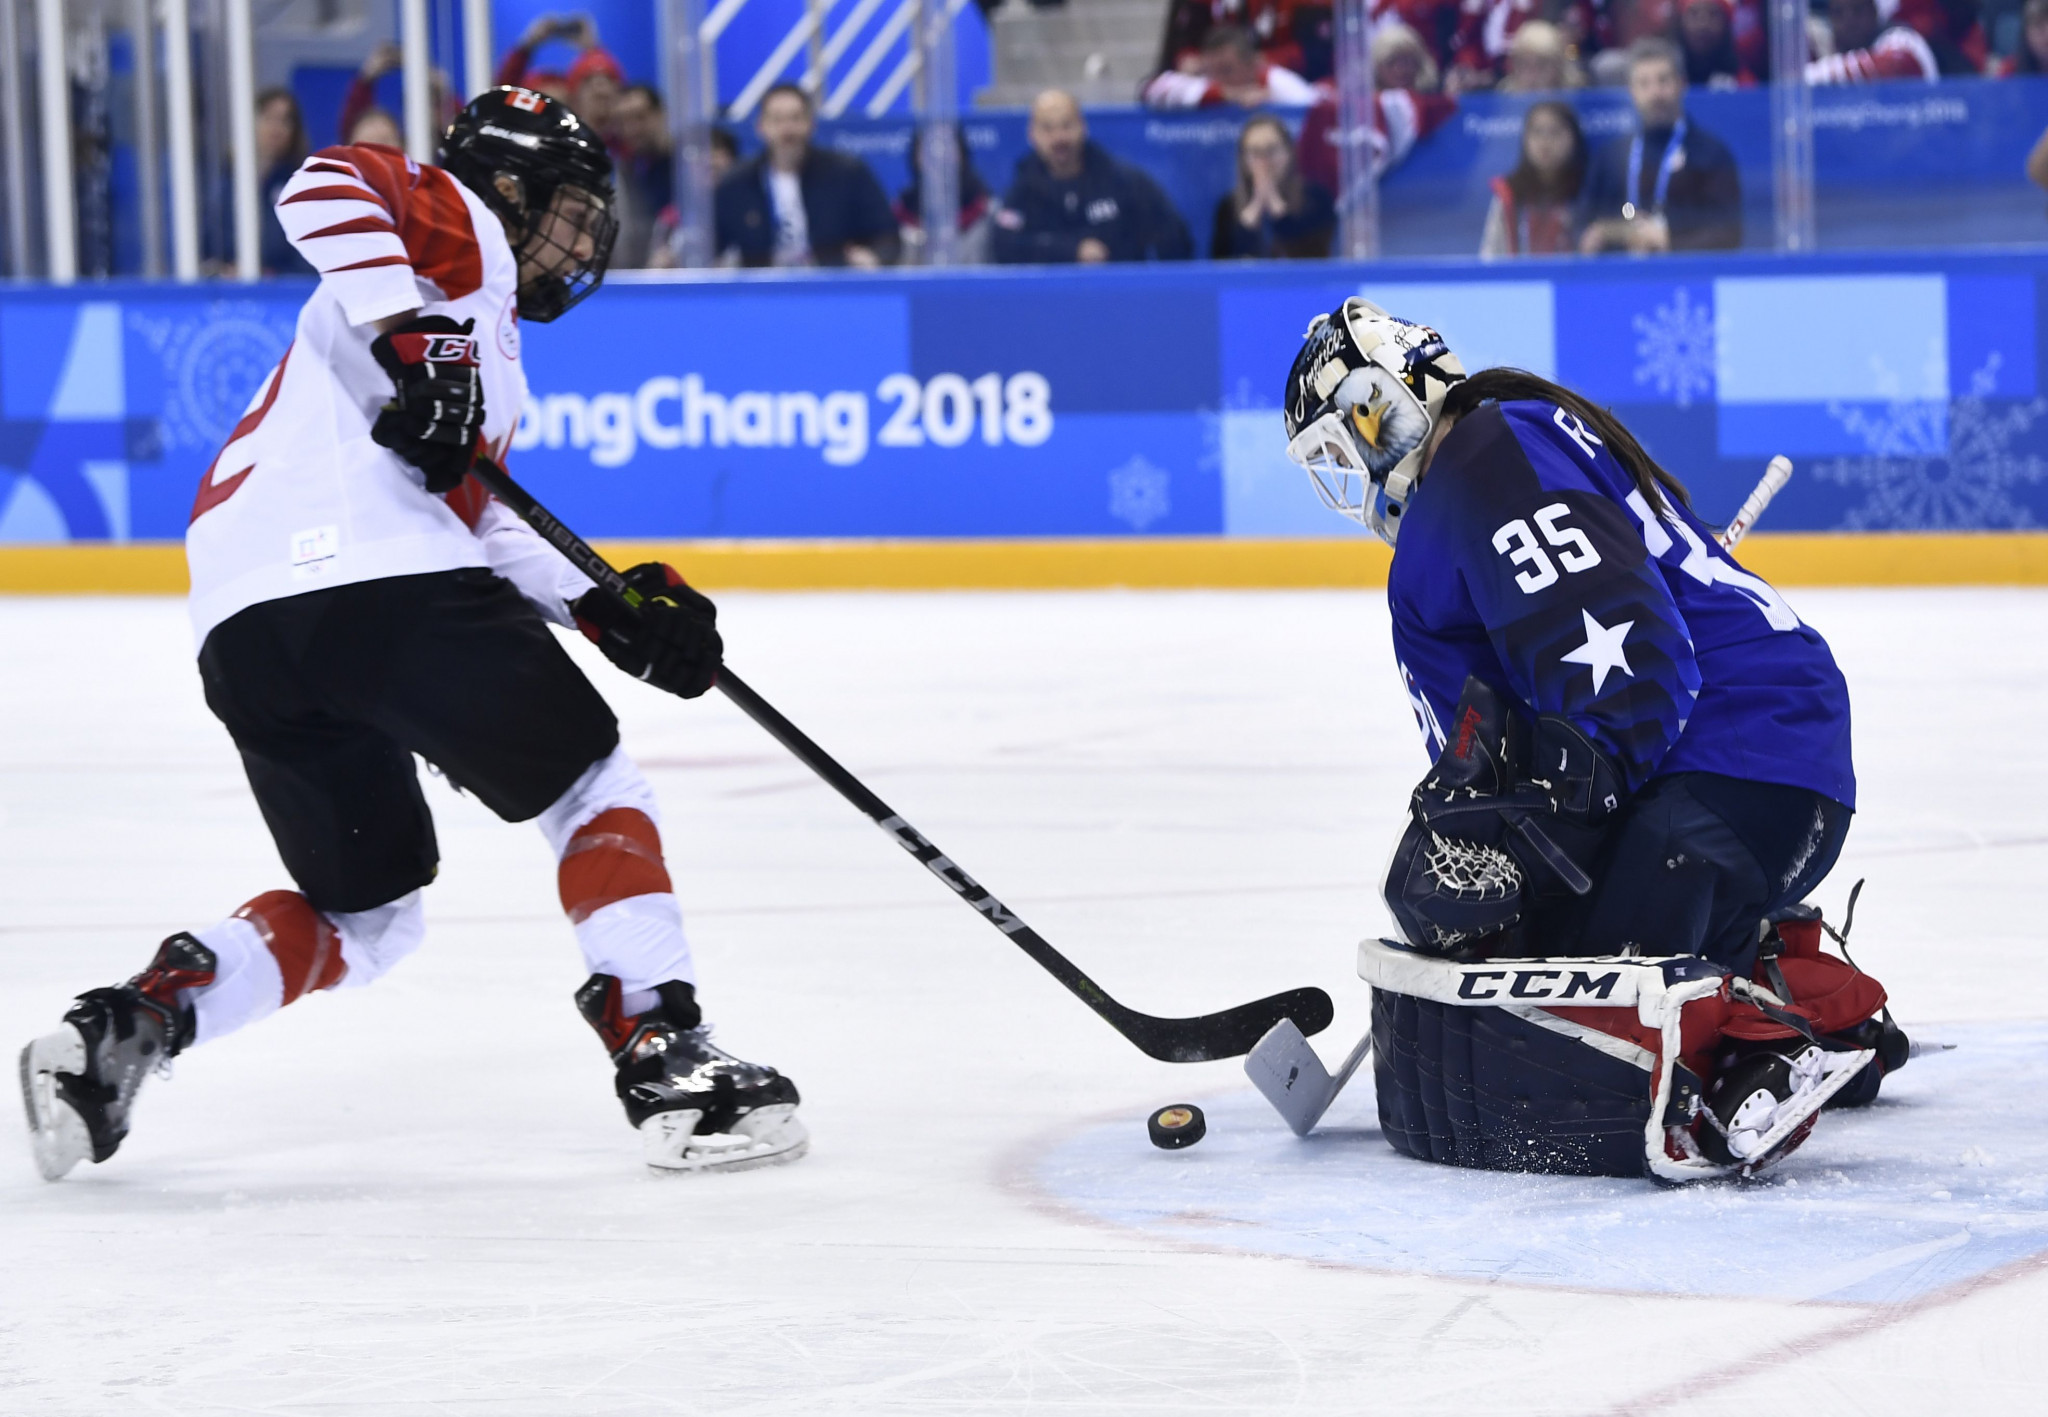 The United States beat Canada to clinch the title ©Getty Images